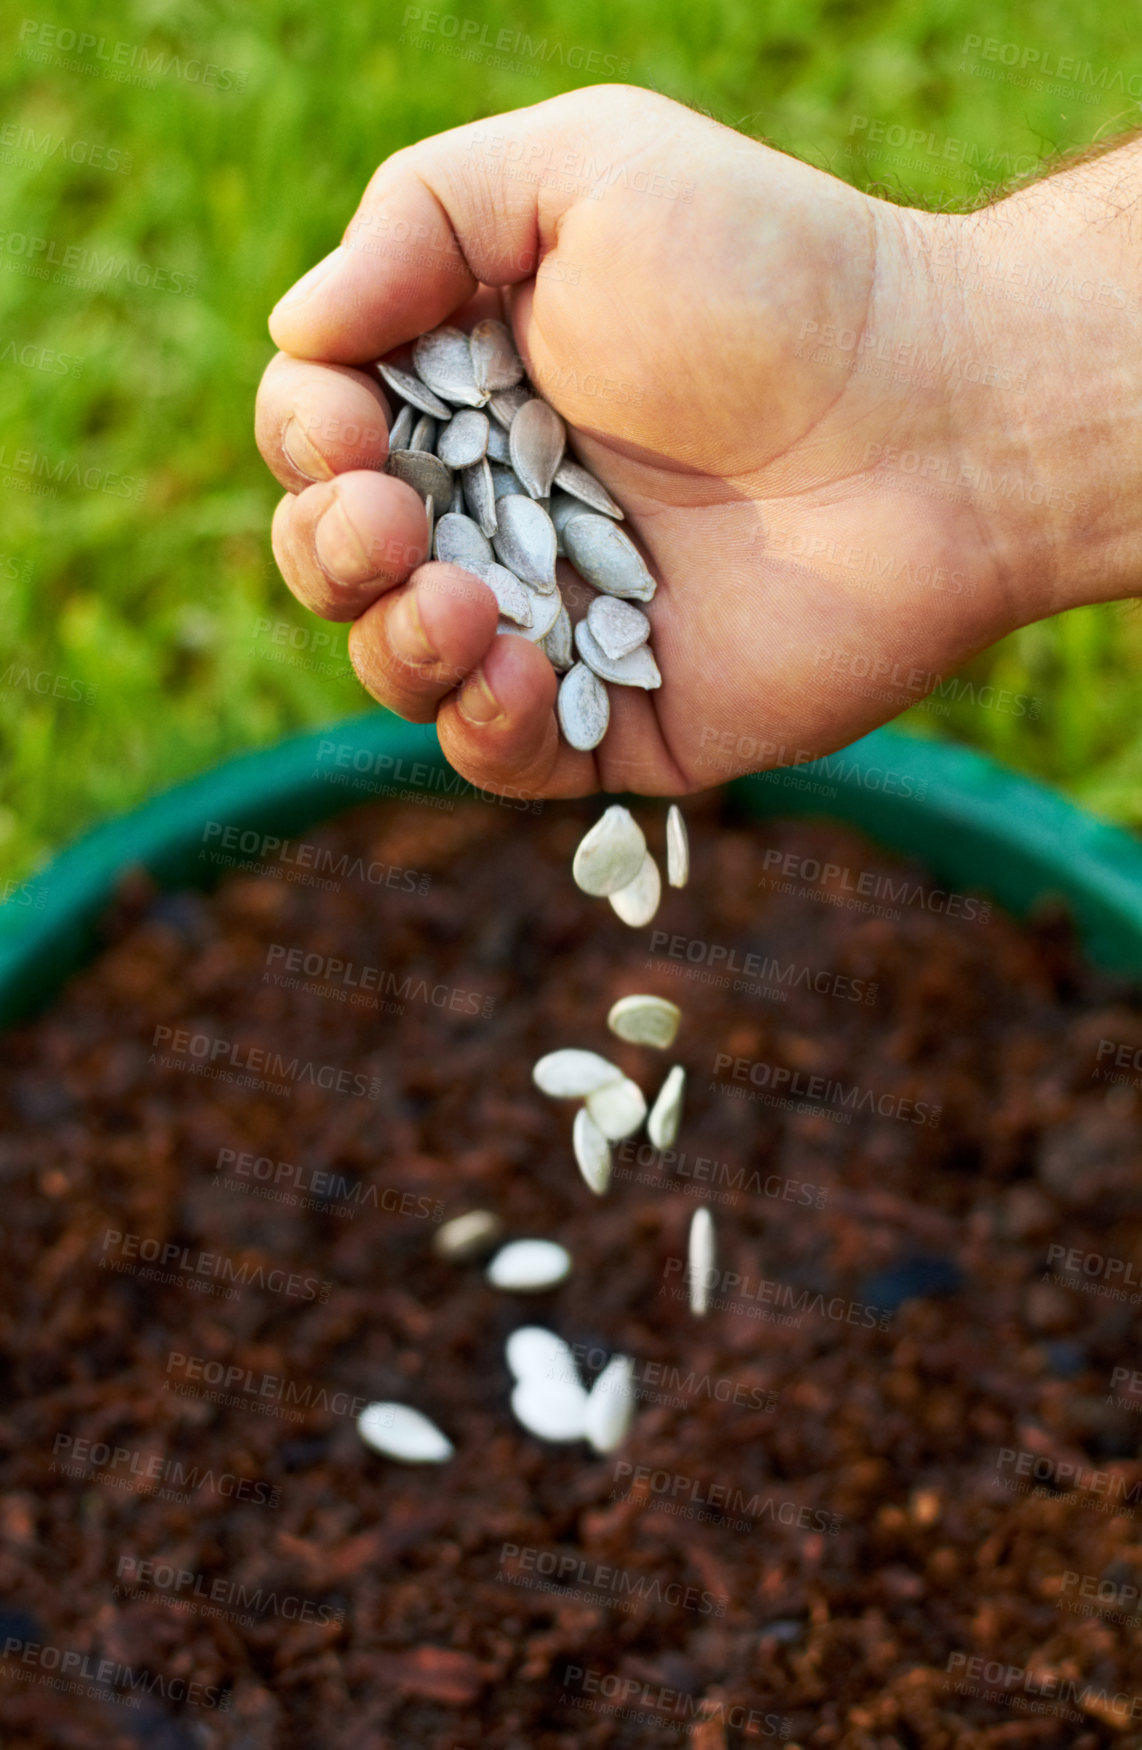 Buy stock photo Shot of a hand dropping seeds into potted soil